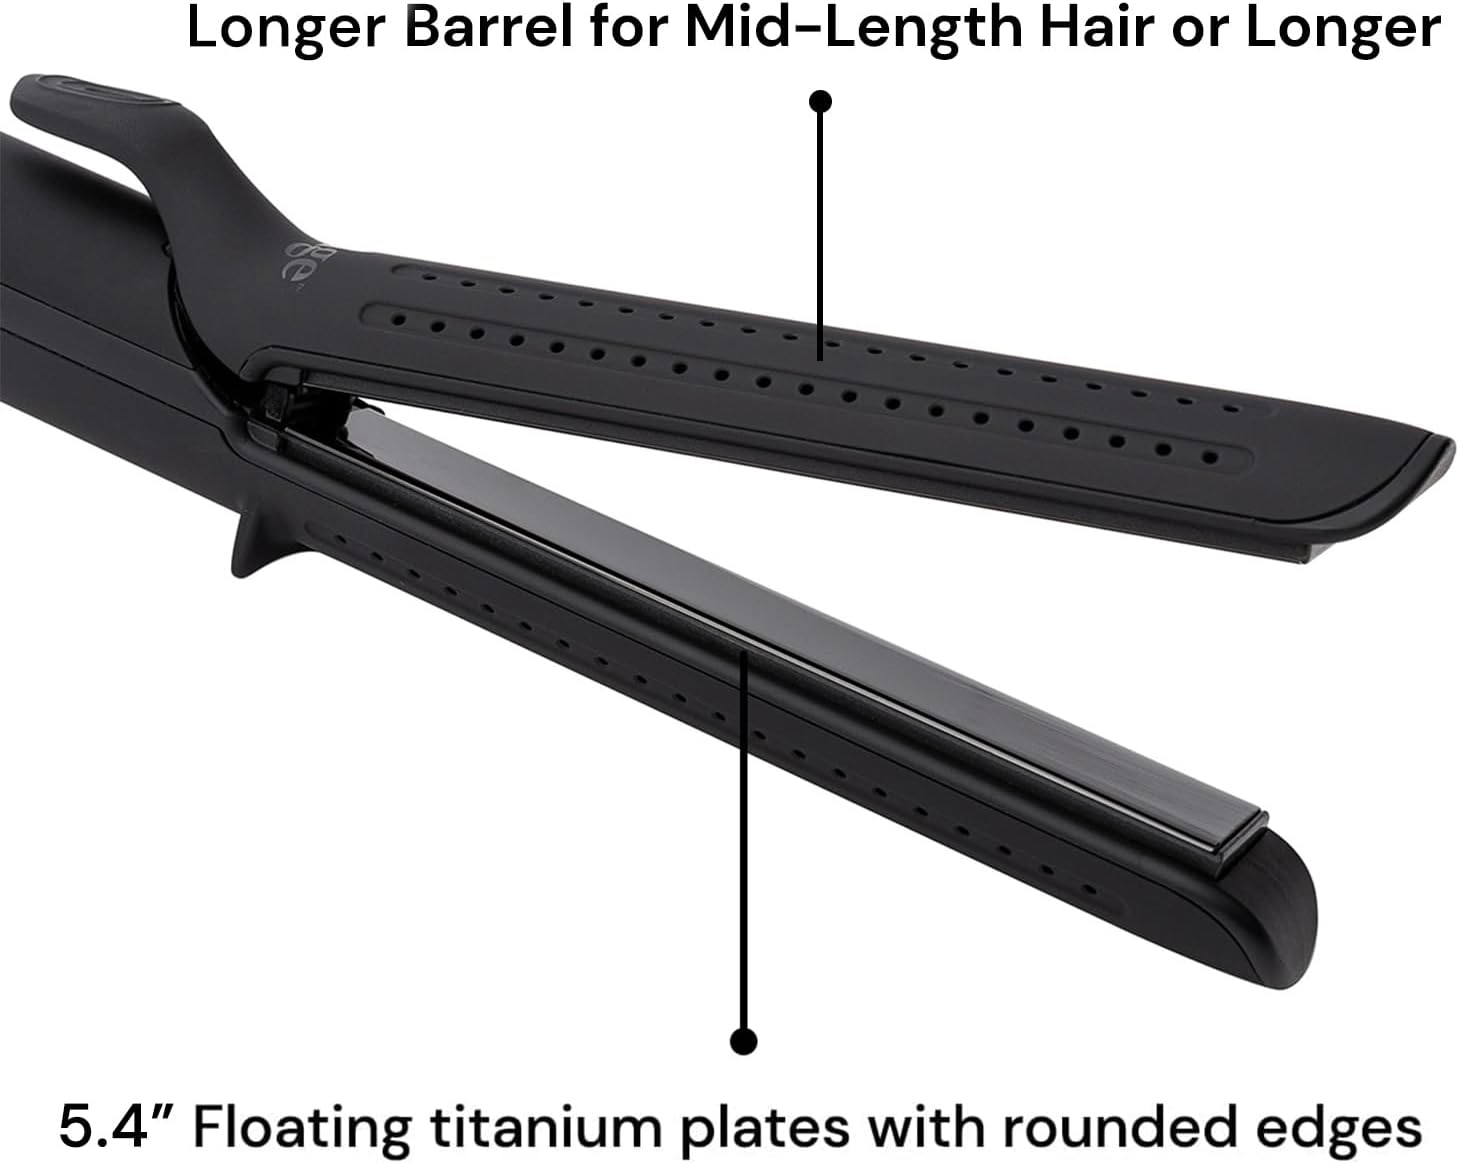 L'ange Hair Le Duo Grande 360° Airflow Styler | 2-in-1 Curling Wand & Titanium Flat Iron Hair Straightener - image 2 of 9